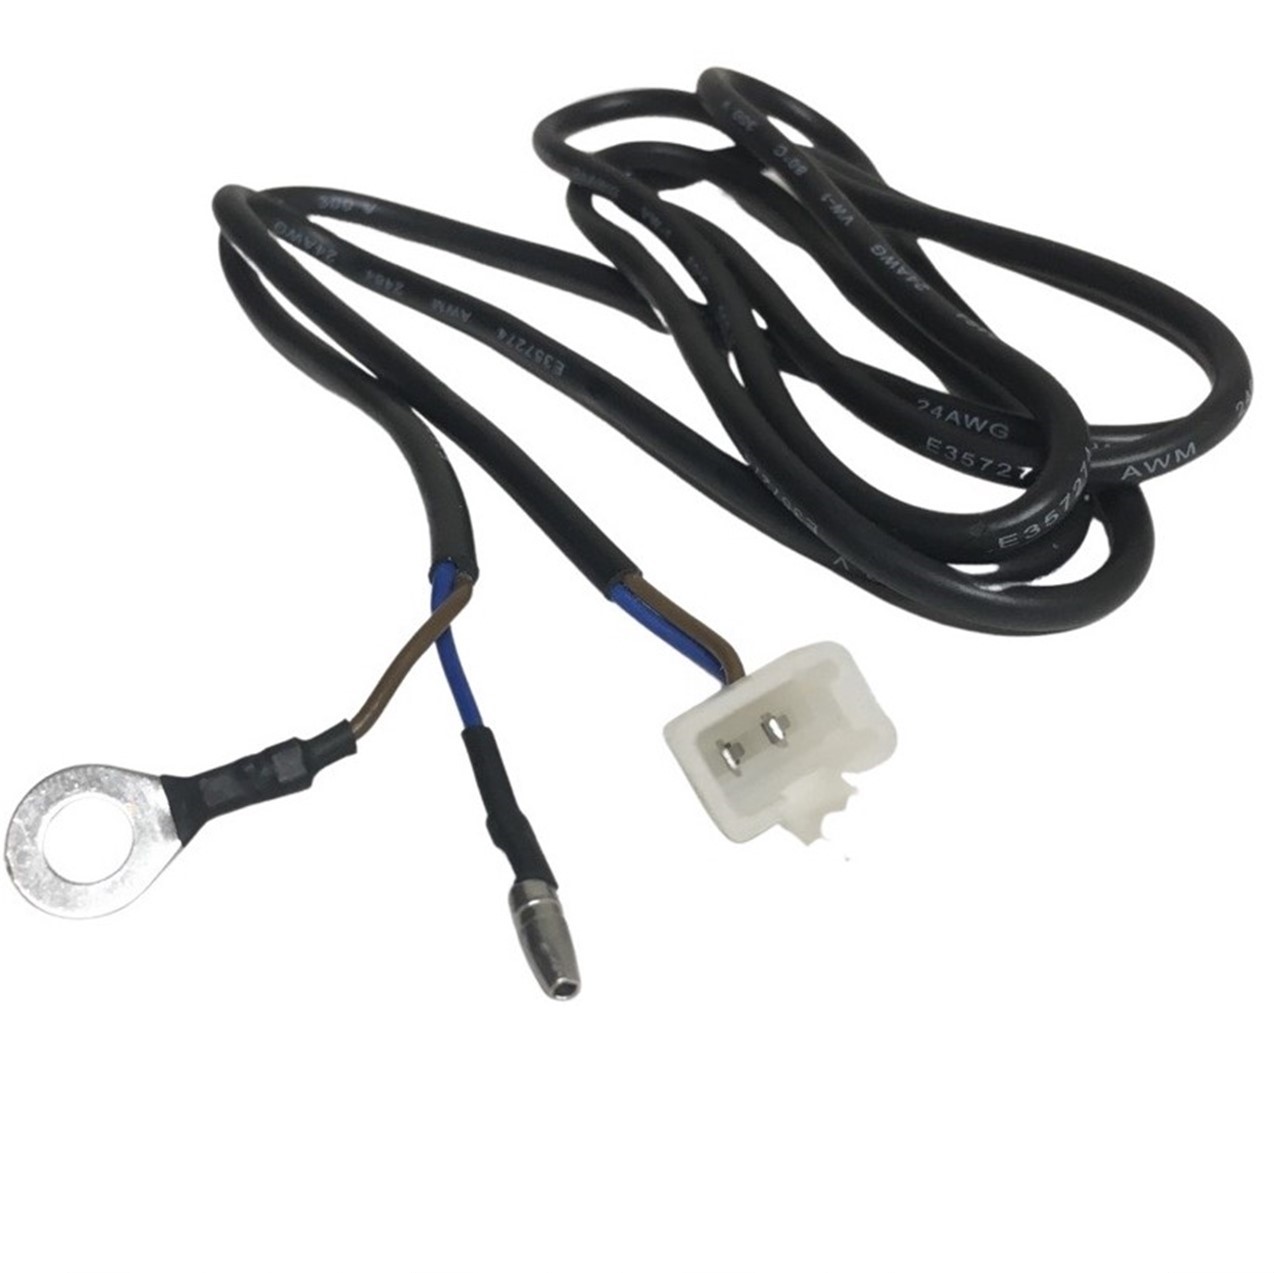 Kill Switch Fits Coleman CK100, GK80, Motovox, + other small GoKarts 2 Pin Female Jach + 2 Wires - Click Image to Close